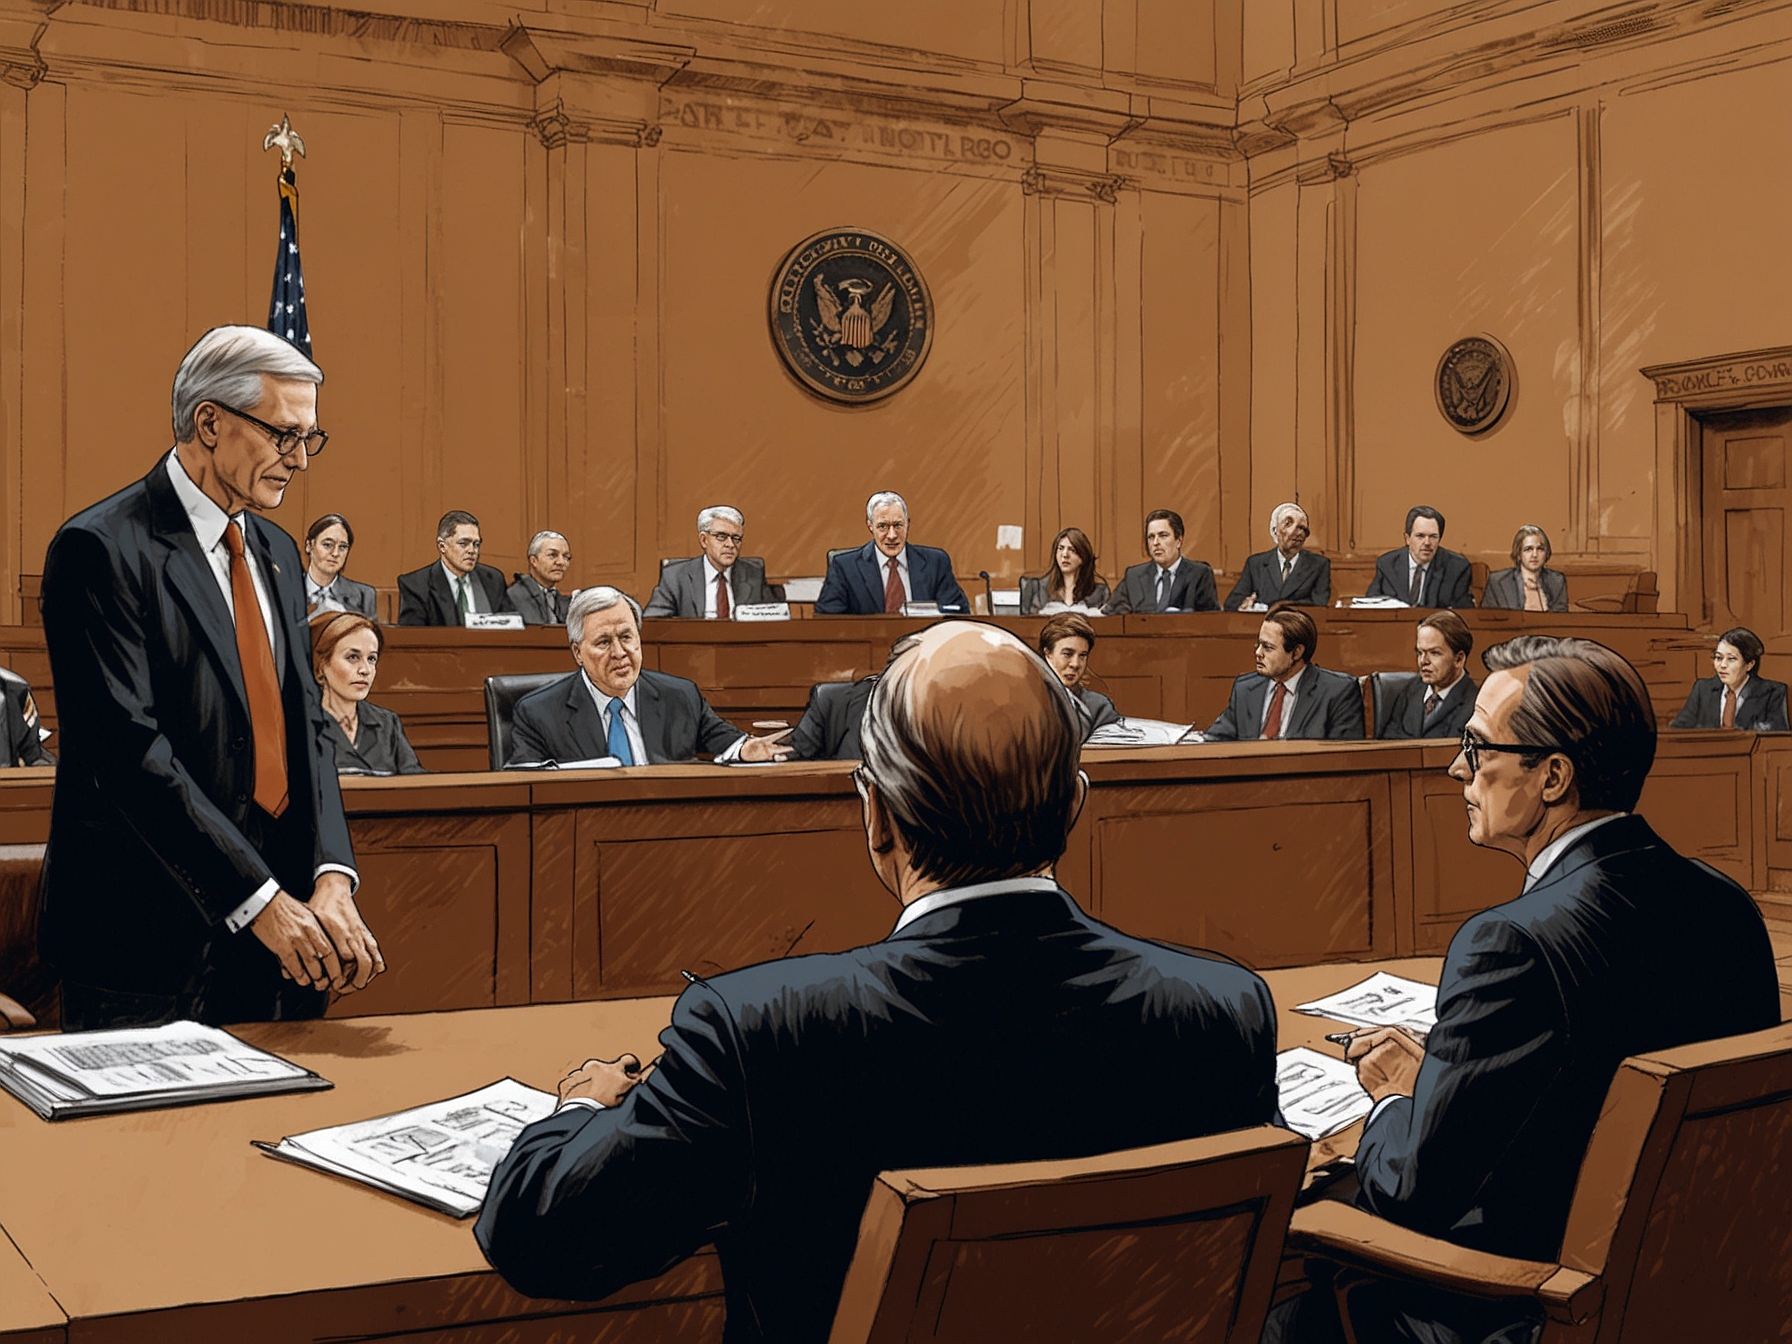 A courtroom illustration showing DOJ officials deliberating, representing the intense legal scrutiny Boeing is under for potentially violating its settlement agreement.